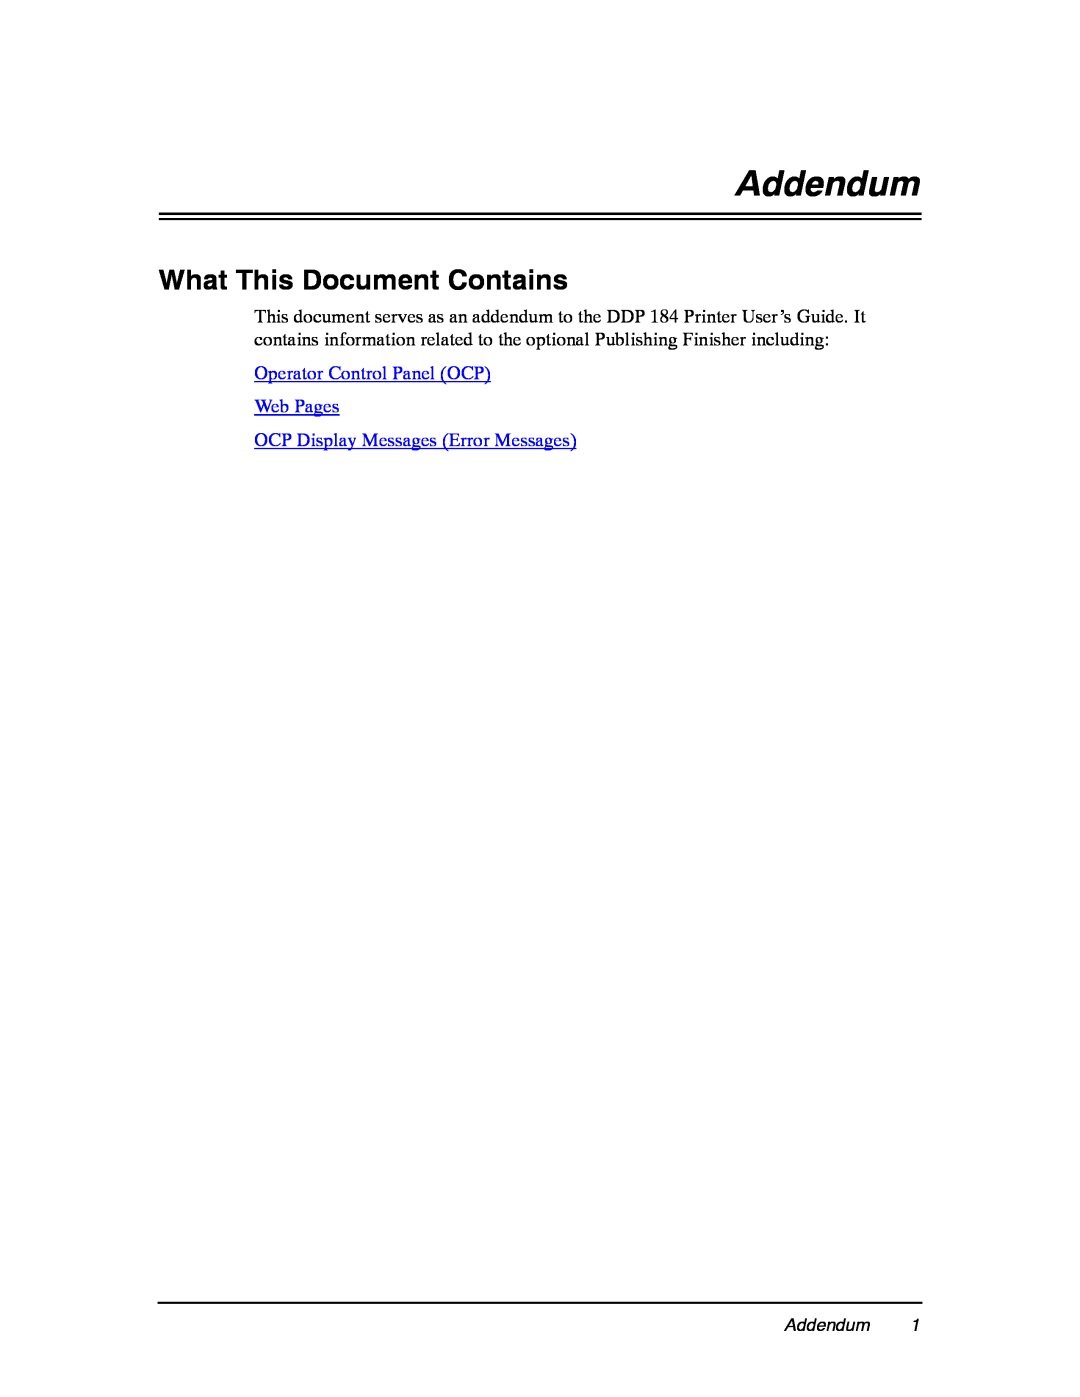 Ricoh DDP 184 manual What This Document Contains, Addendum, Operator Control Panel OCP Web Pages 